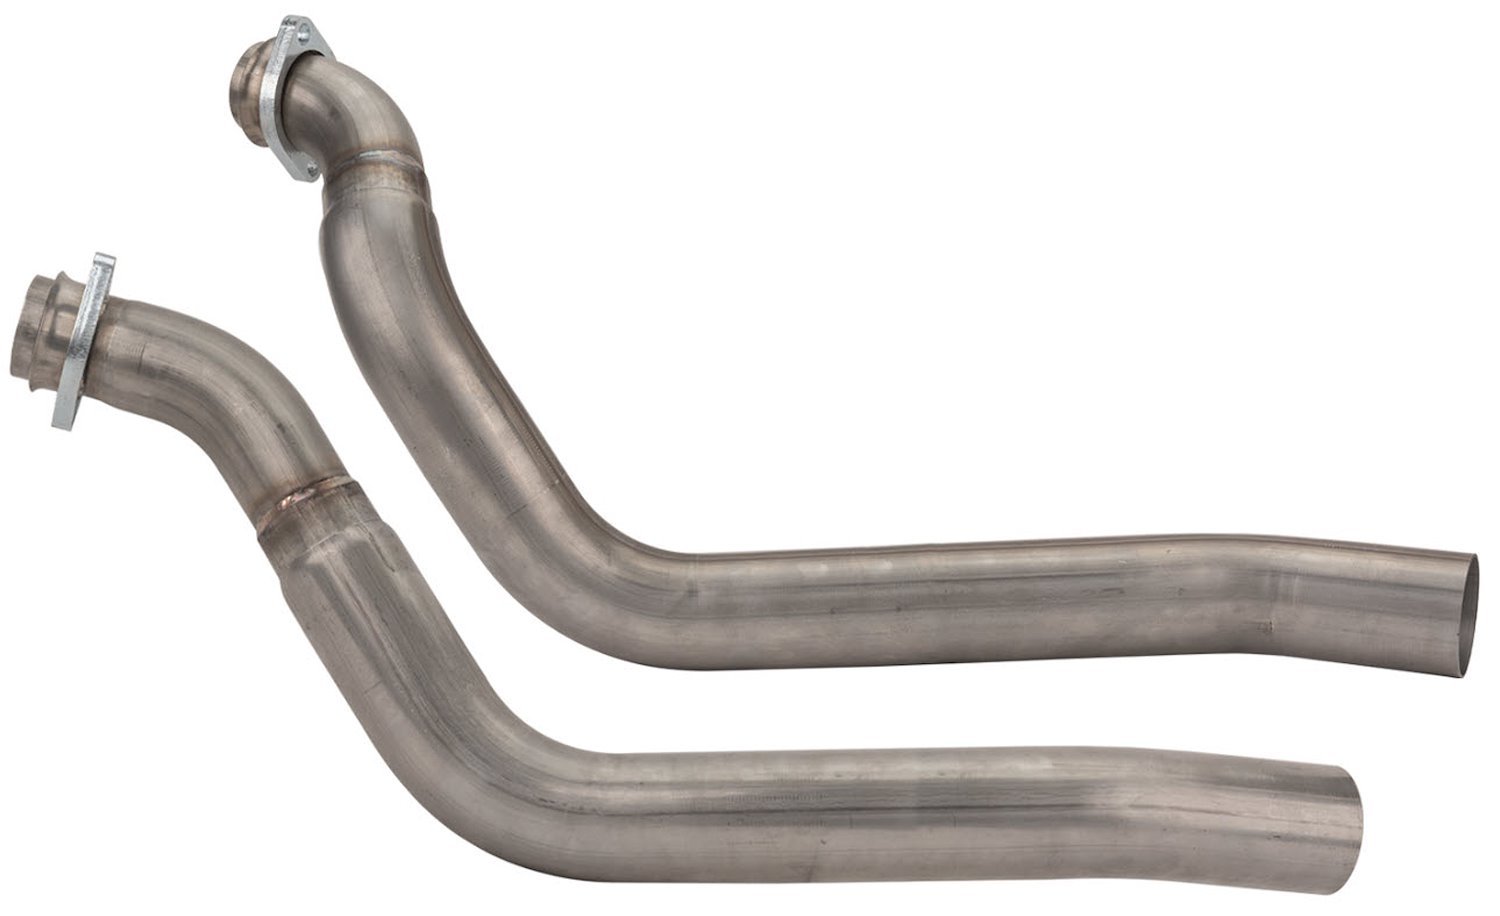 DFF10S Stainless Steel Exhaust Manifold Downpipes for 1966-1971 Ford Fairlane w/Ford Small Block Engine